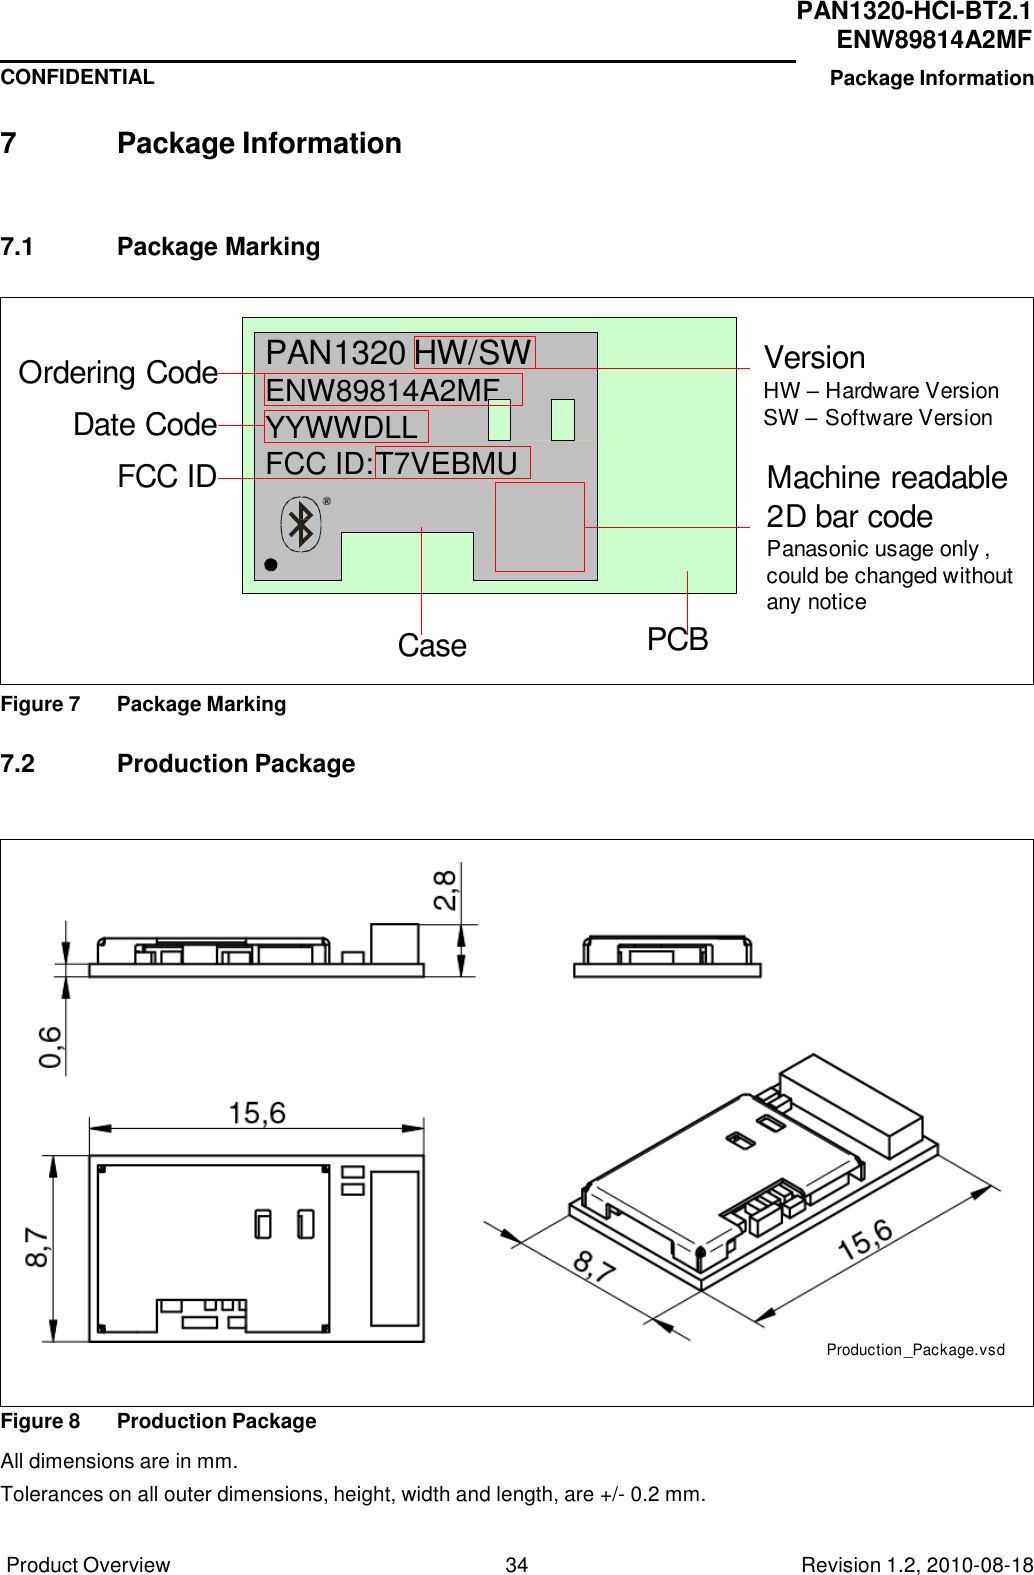 Product Overview 34 Revision 1.2, 2010-08-18   PAN1320-HCI-BT2.1 ENW89814A2MF CONFIDENTIAL Package Information     7  Package Information    7.1  Package Marking     Ordering Code Date Code FCC ID PAN1320 HW/SW ENW89814A2MF YYWWDLL FCC ID:T7VEBMU        Case  PCB Version HW – Hardware Version SW – Software Version  Machine readable 2D bar code Panasonic usage only , could be changed without any notice  Figure 7  Package Marking   7.2  Production Package                            Production _Package.vsd   Figure 8  Production Package  All dimensions are in mm. Tolerances on all outer dimensions, height, width and length, are +/- 0.2 mm. 